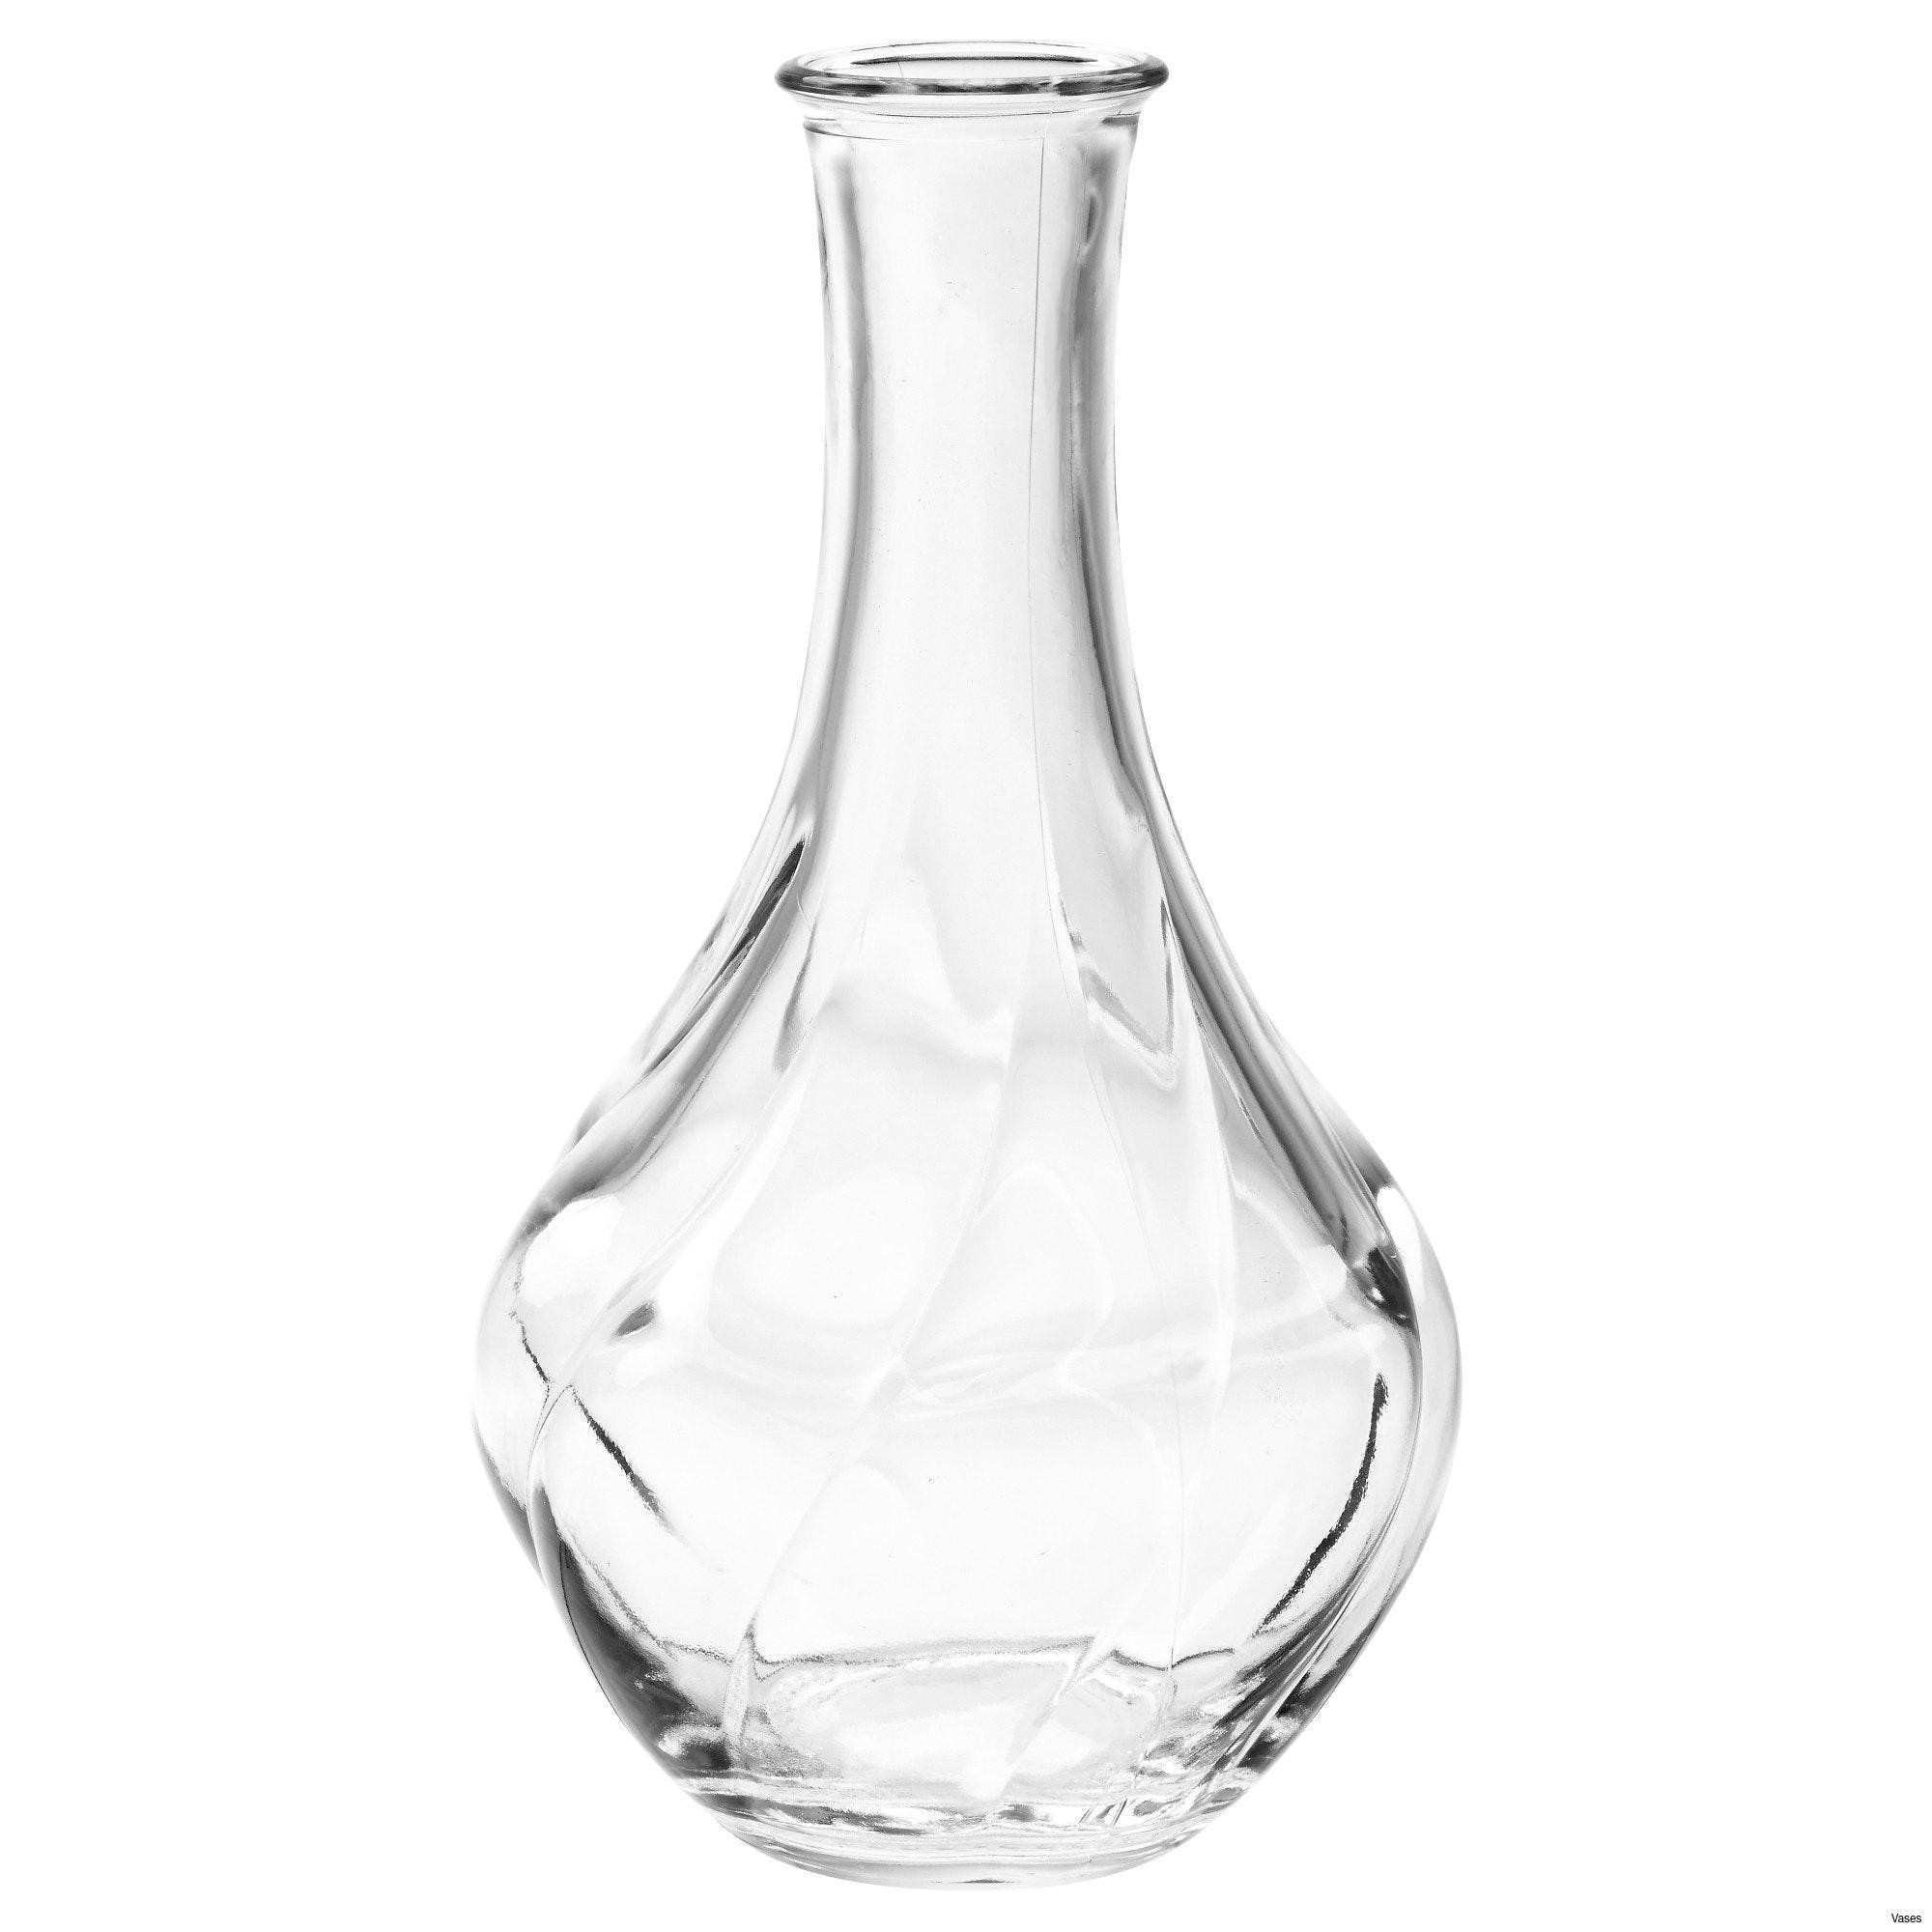 28 Ideal Tj Maxx Vases 2024 free download tj maxx vases of small glass vase photos vases floating candle vase set glass regarding small glass vase pics small outdoor lights best living room glass vases fresh clear of small